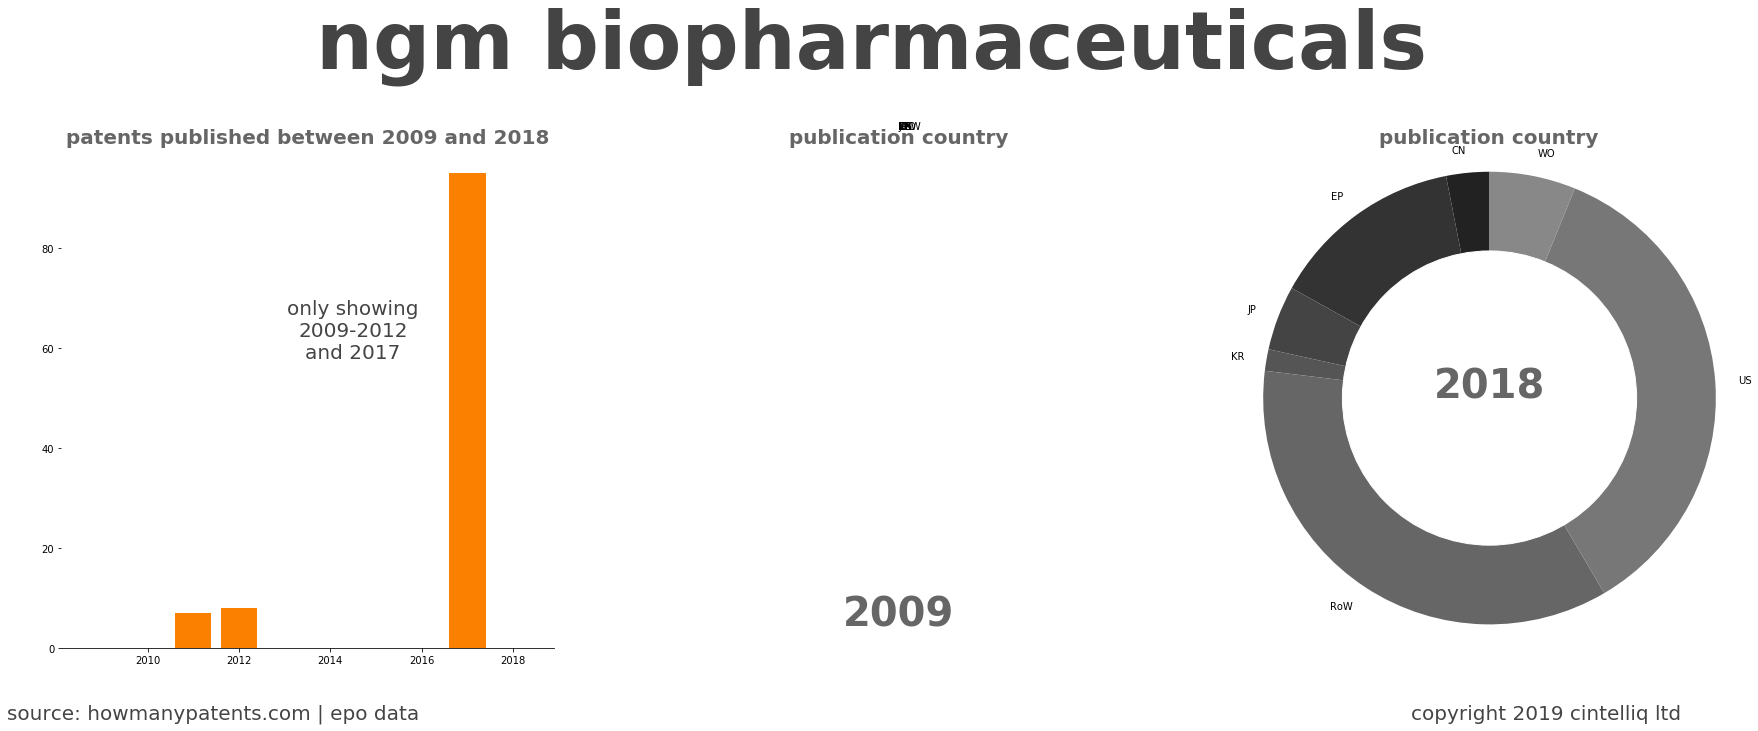 summary of patents for Ngm Biopharmaceuticals